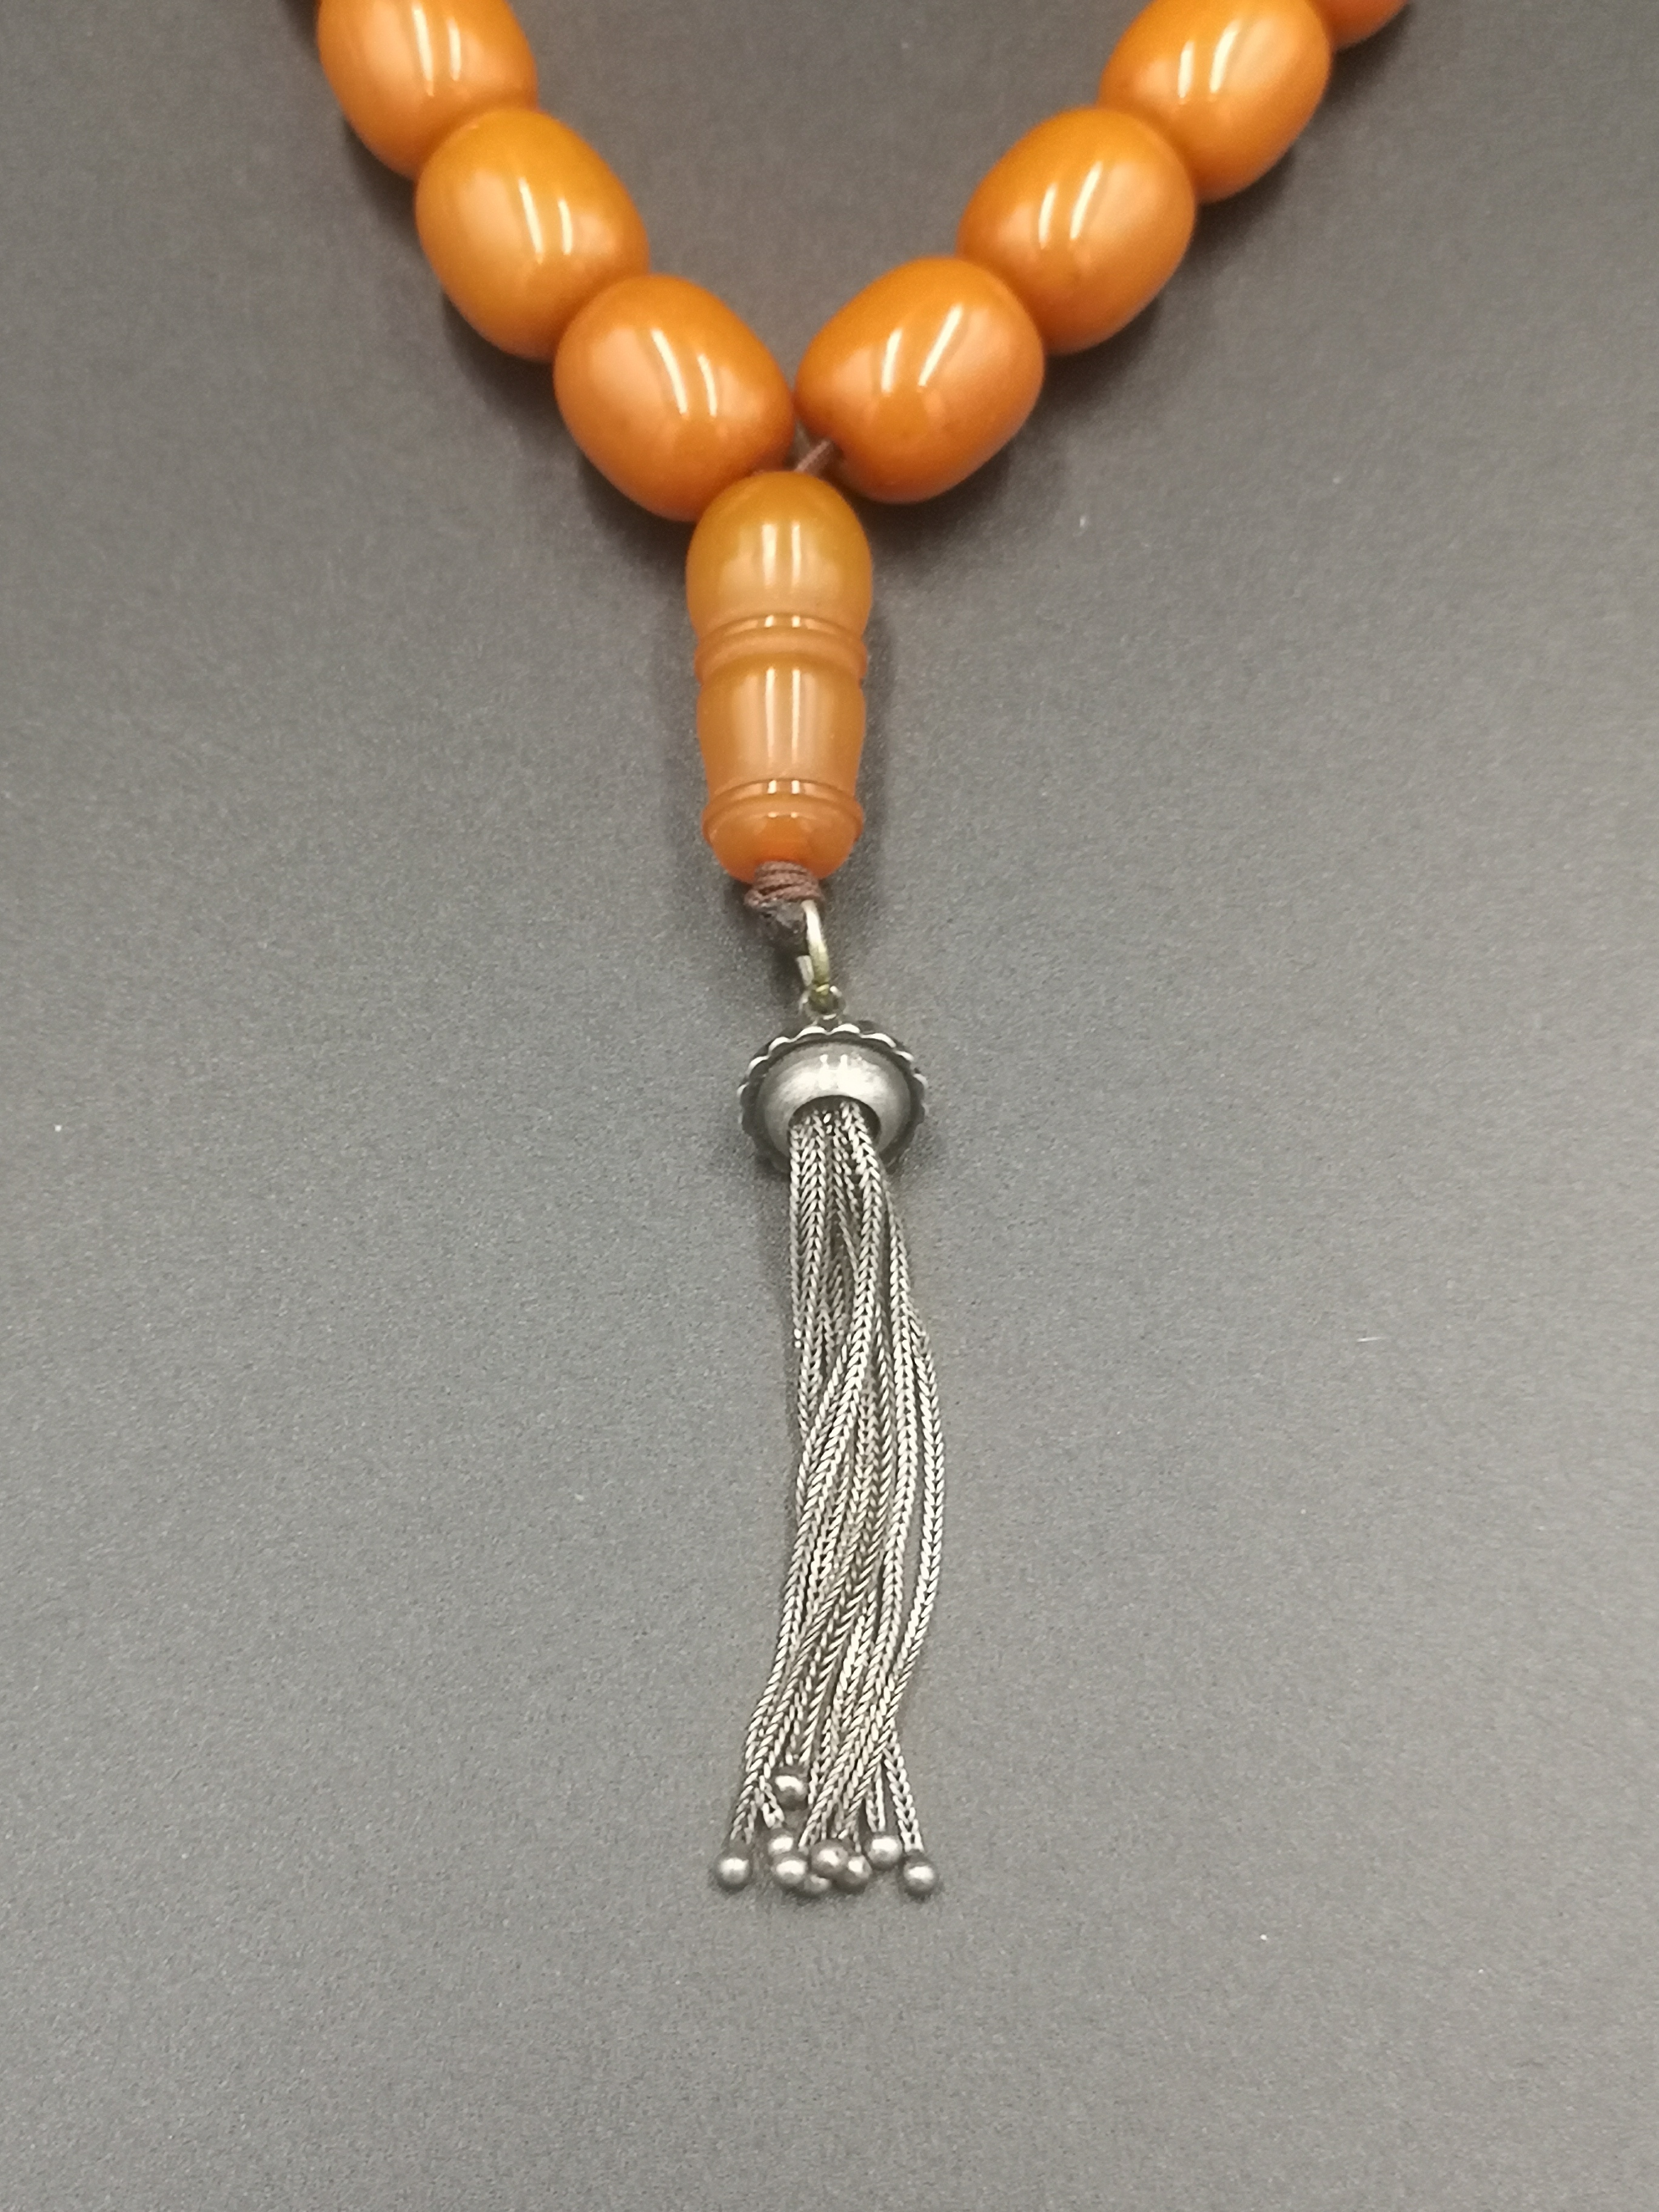 Formed natural butterscotch worry beads - Image 3 of 4